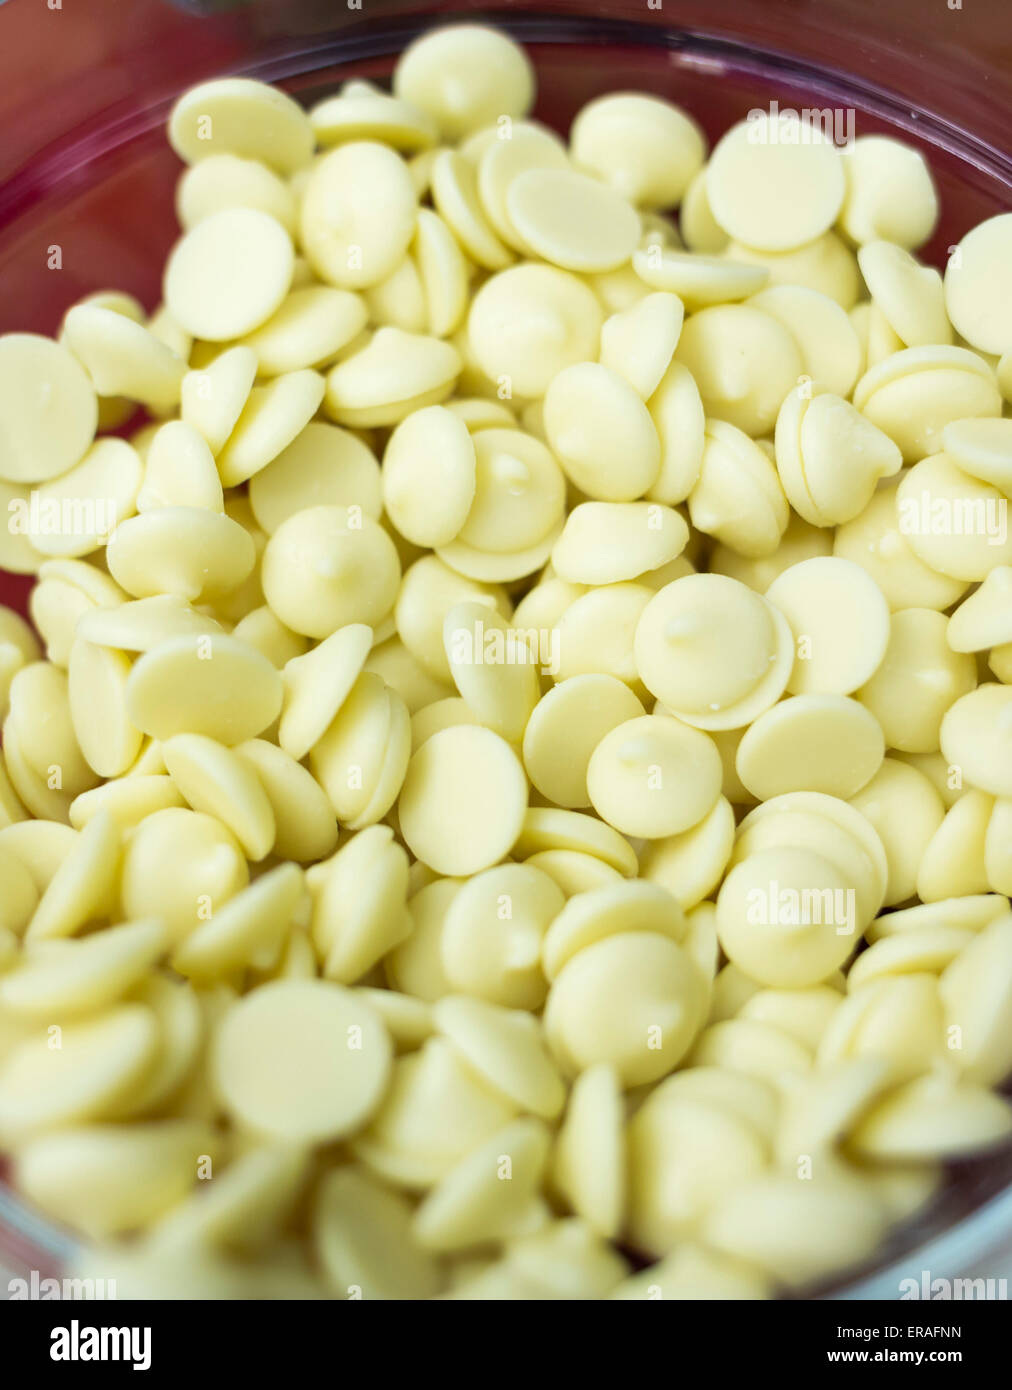 White chocolate chips for sweets decoration in a cup. Stock Photo